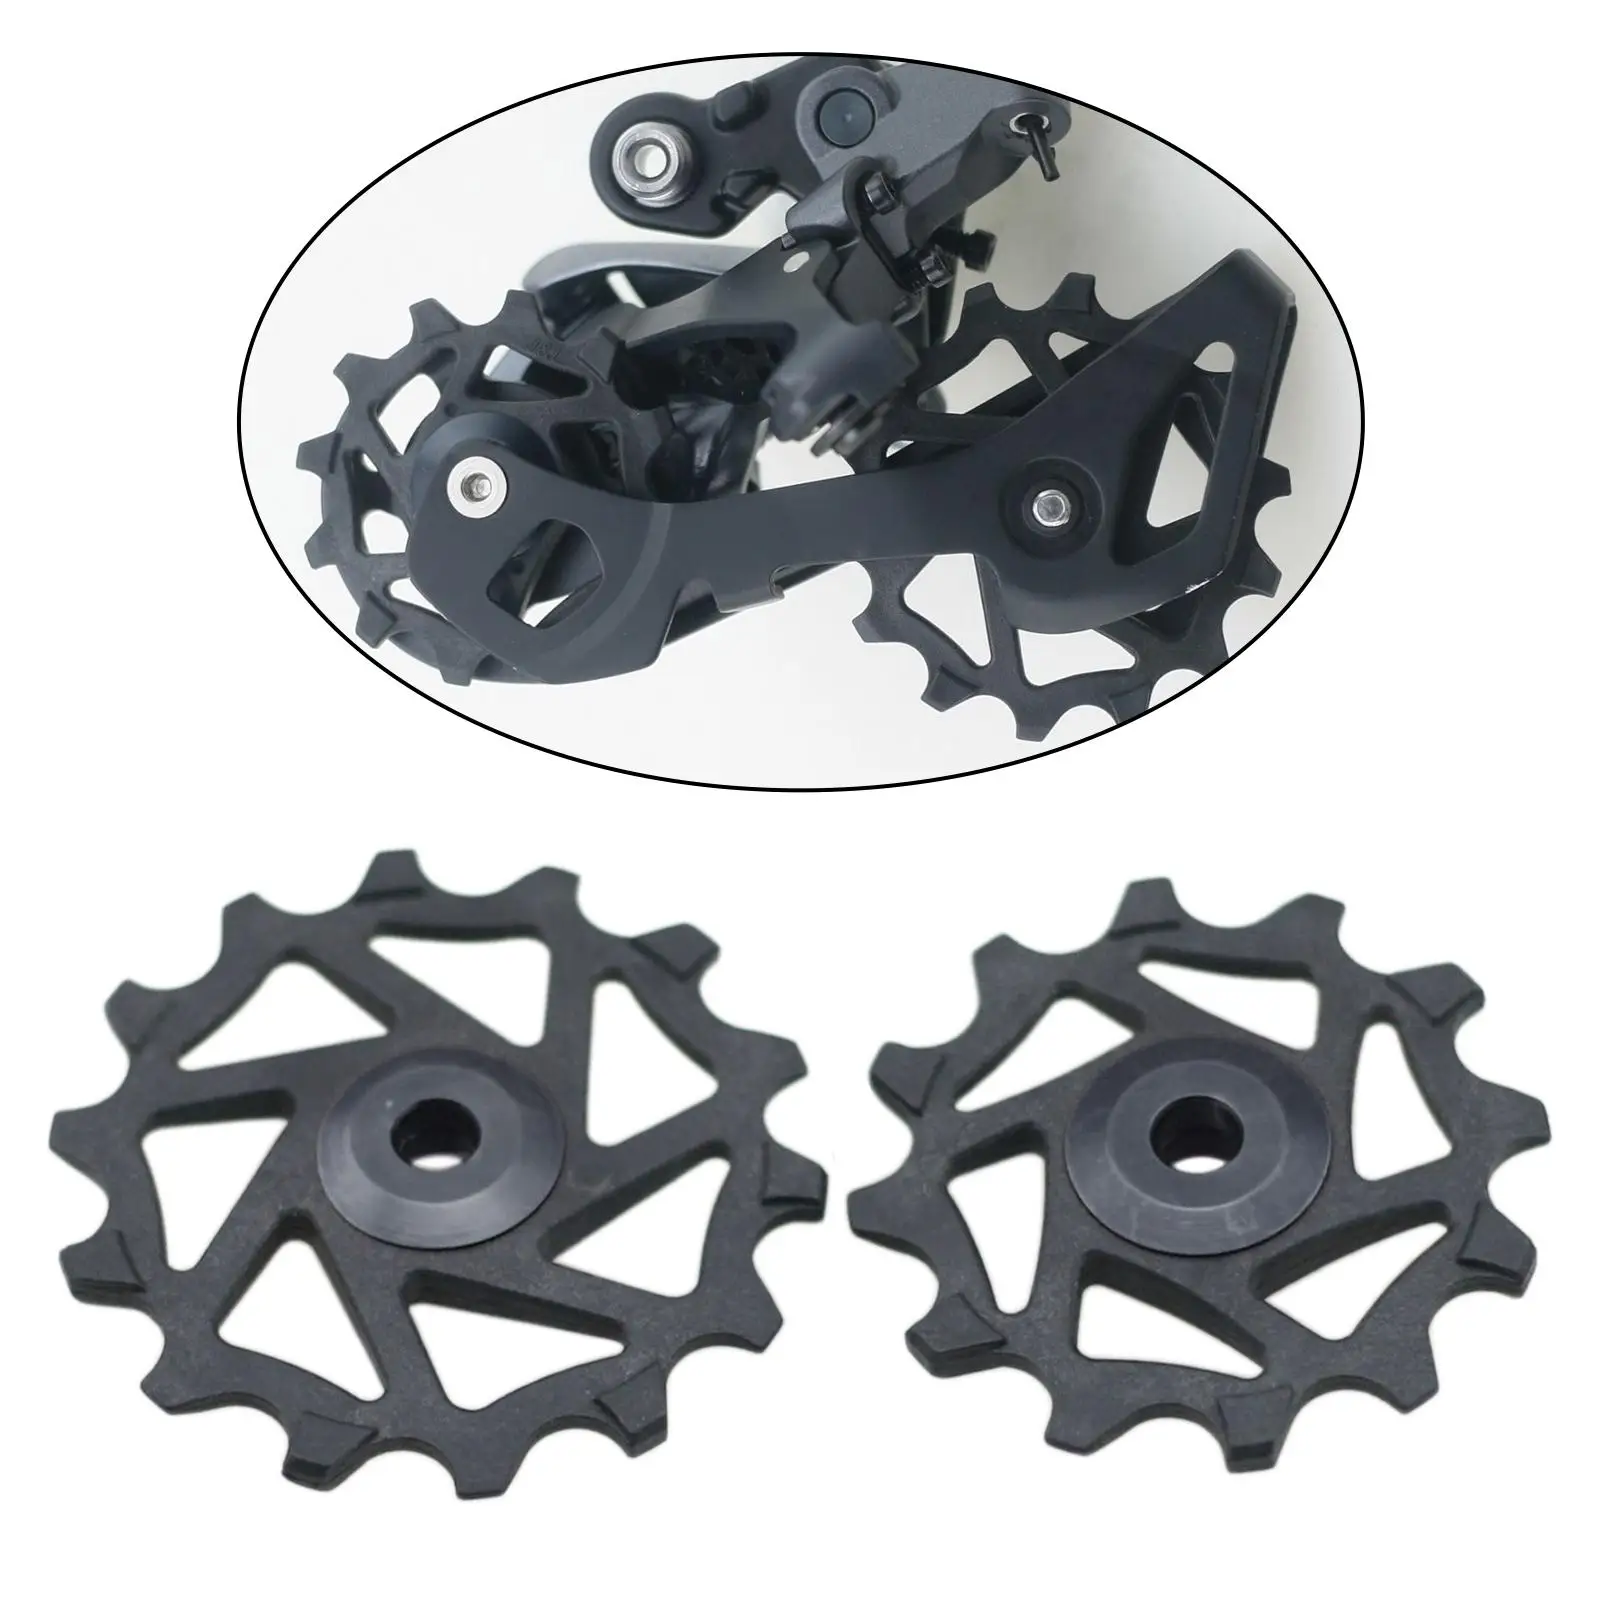 Bike Resin Bearing Jockey Wheel Pulley Bicycle Rear Derailleur Cycling 12T+14T for XX1 X01 Bicycle Cycling Part